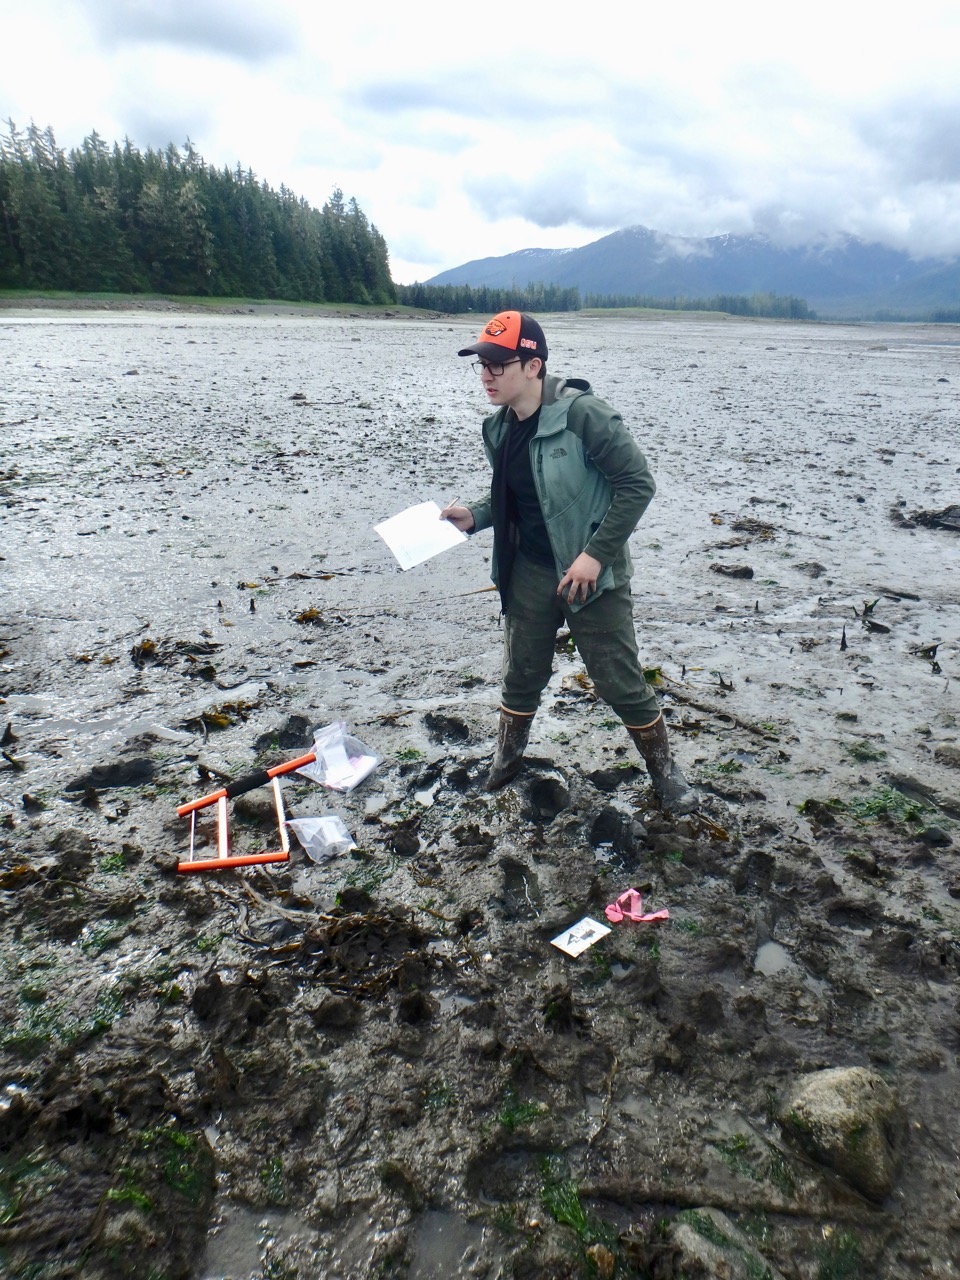 URSA student Michael Lorain conducts research on prehistoric fish weirs in southeast Alaska during summer 2018.